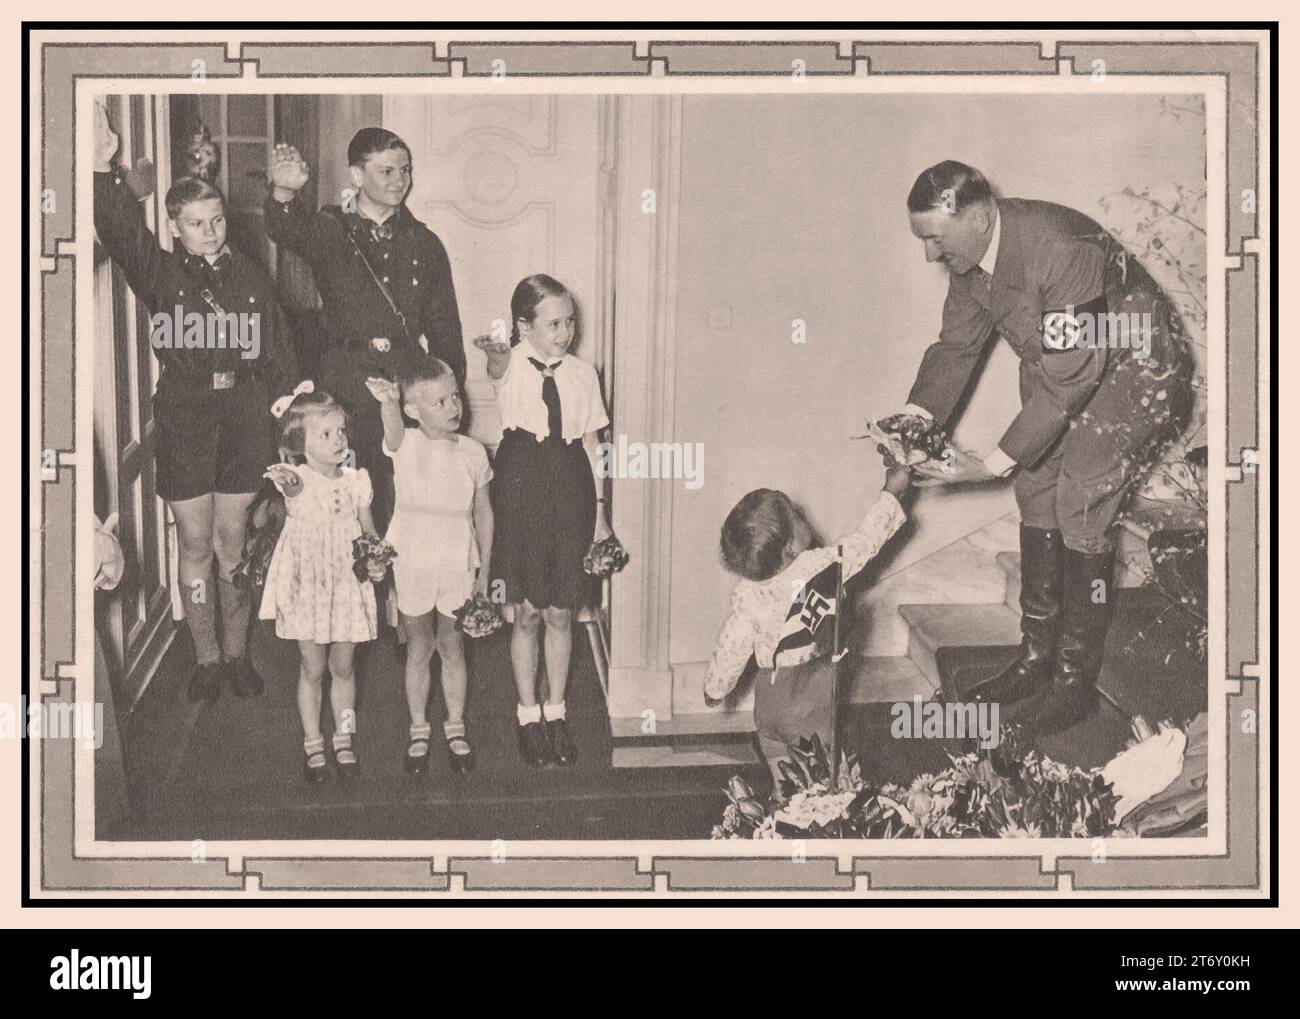 Adolf Hitler with children 1939 Fuhrer of Nazi Germany receiving flowers from an infant, whilst young children with BDM Girl and Hitler Youth in uniform ( Hitler Jugend Hitler Youth) look on giving the Heil Hitler salute. Stock Photo